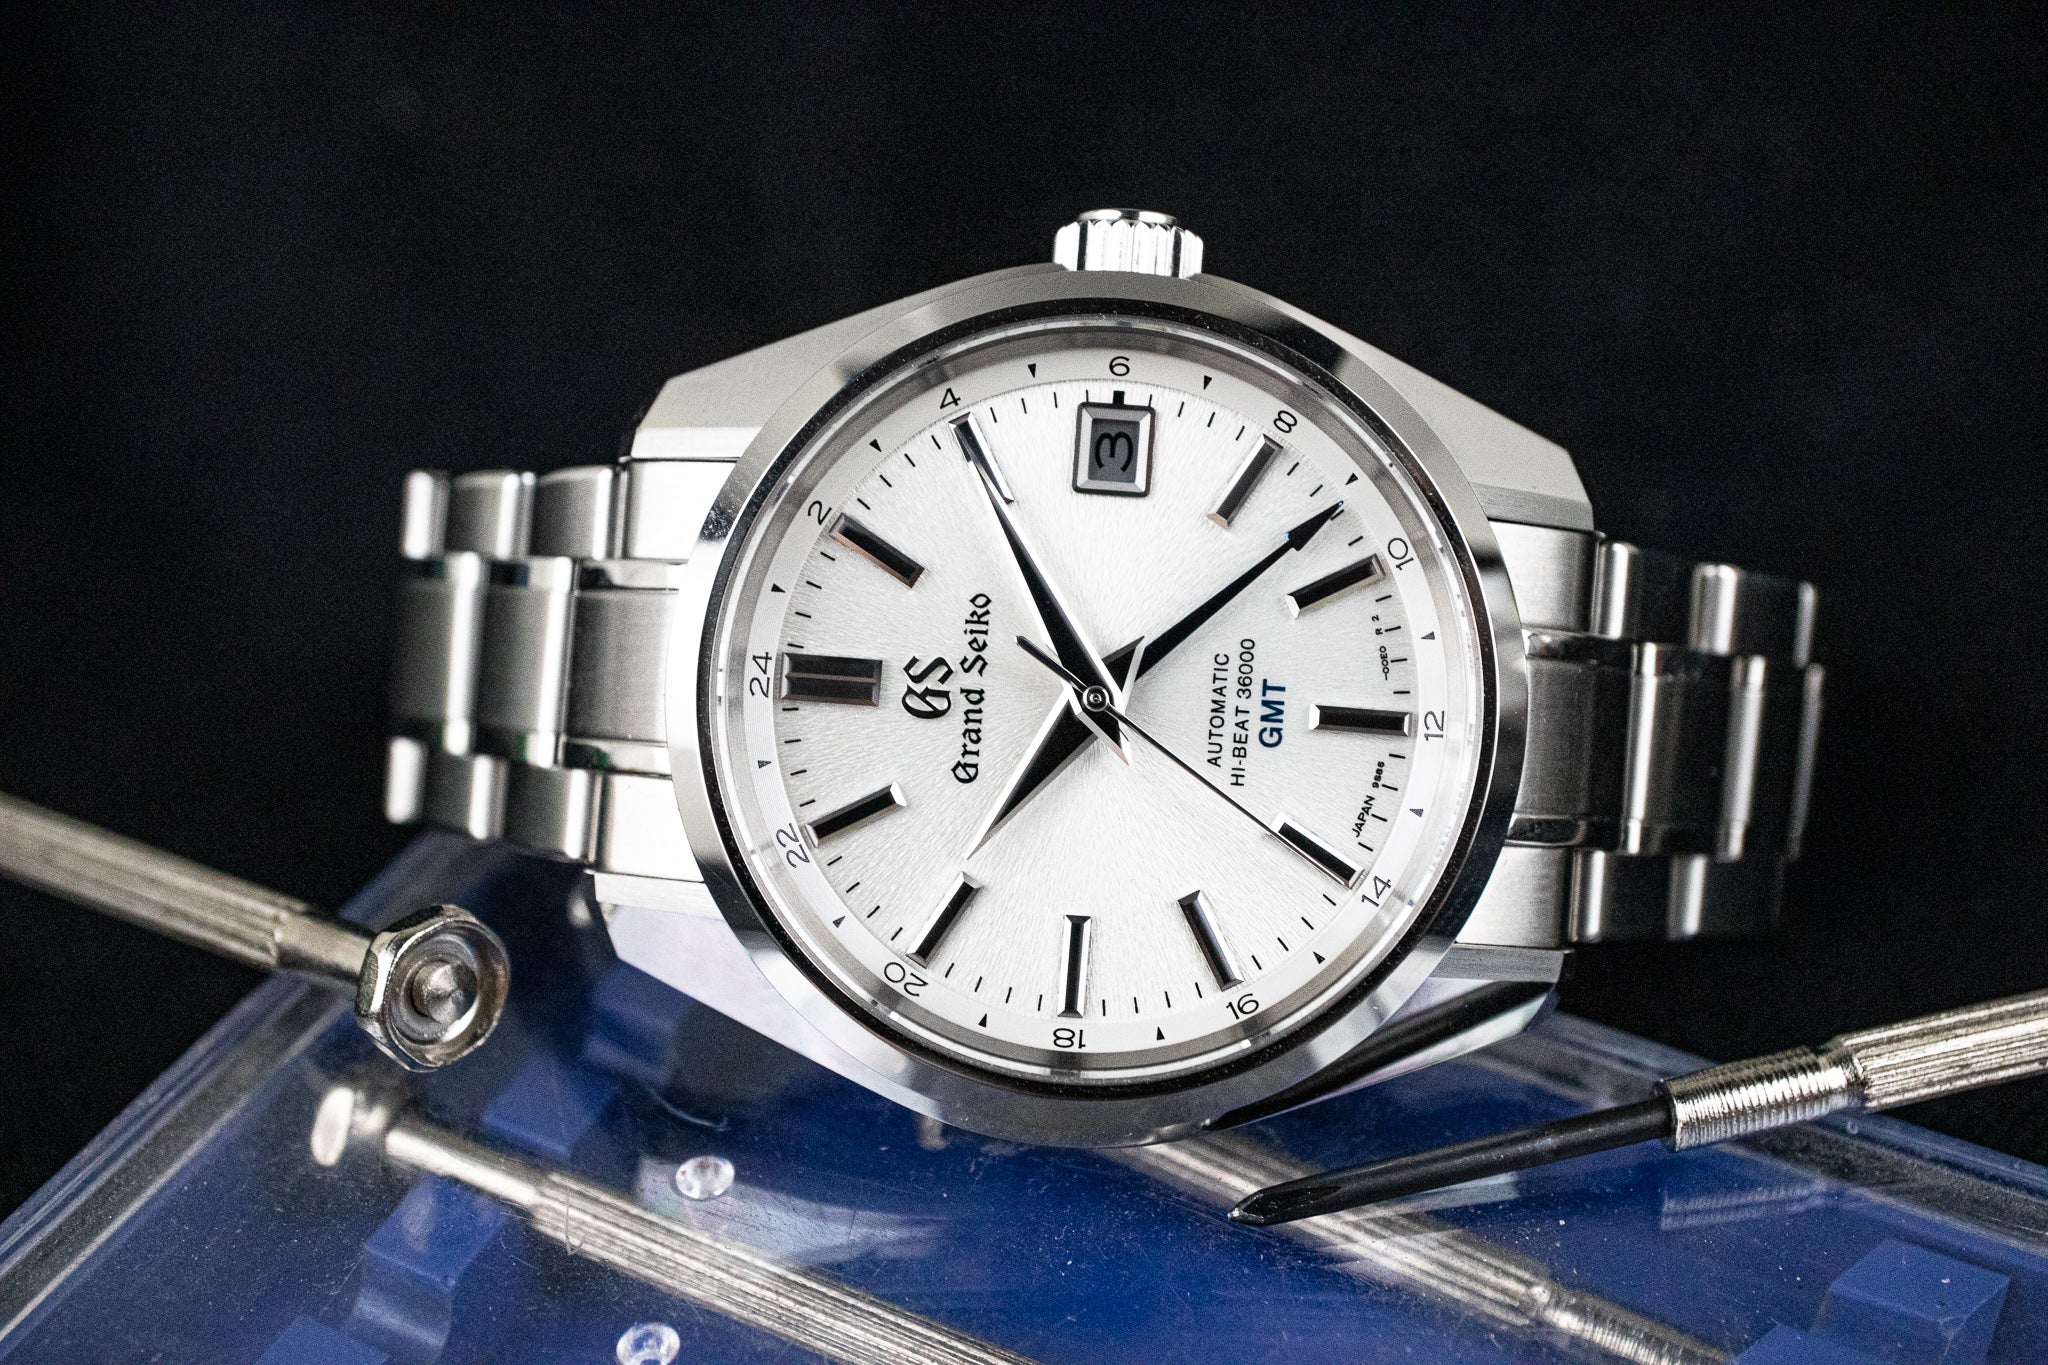 Pre-Owned: Grand Seiko SBGJ201 – Belmont Watches